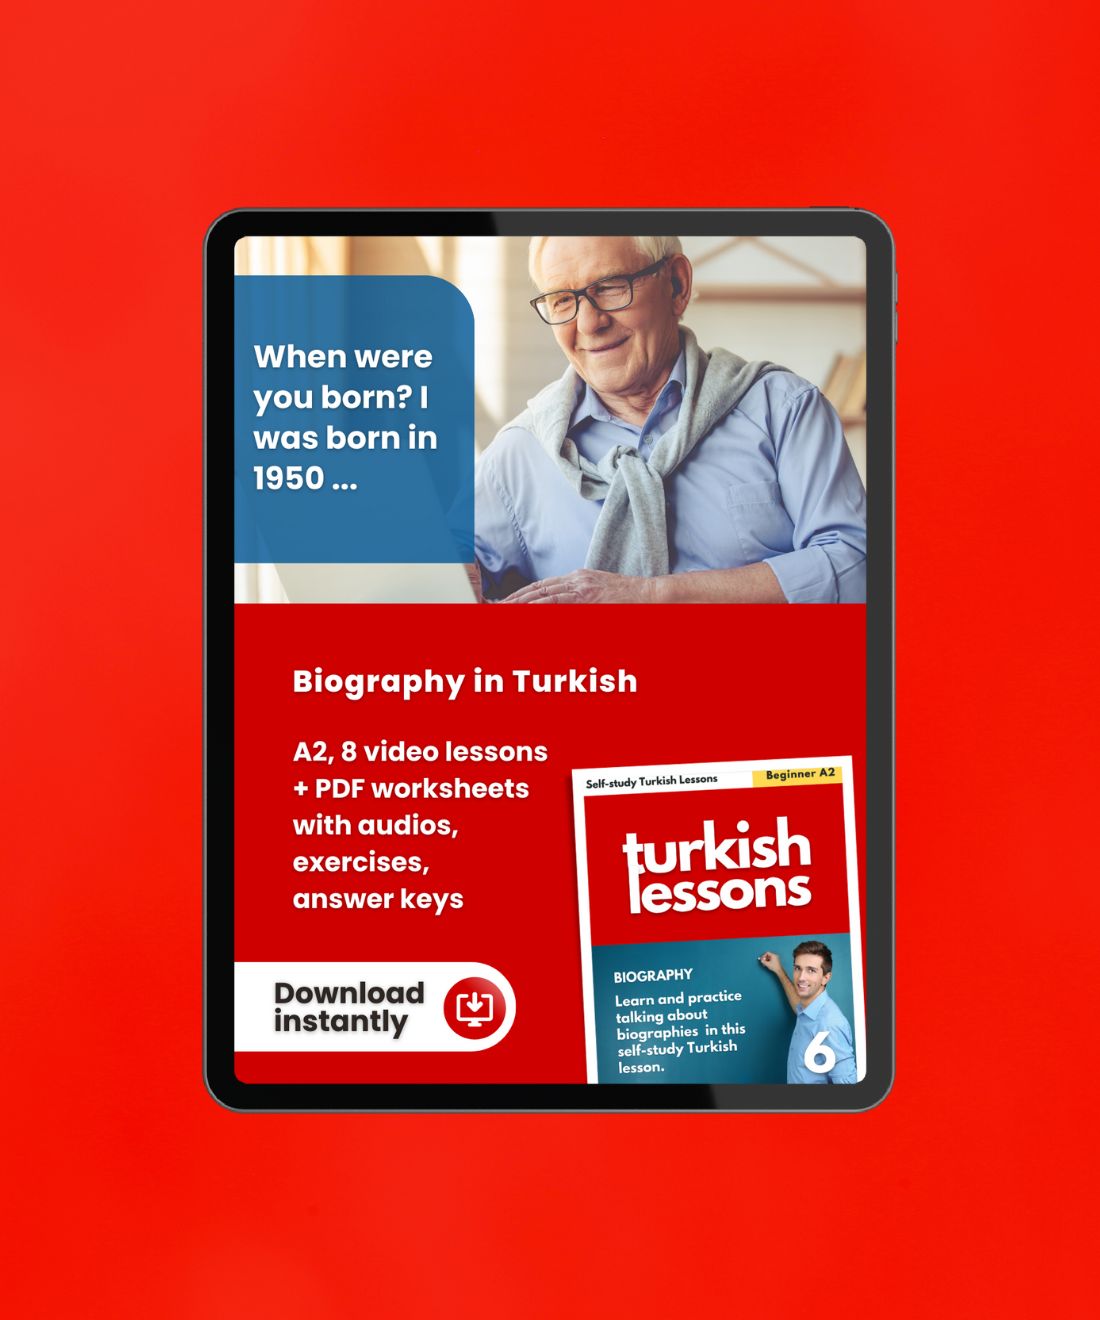 turkish lessons a2 - biography in turkish language